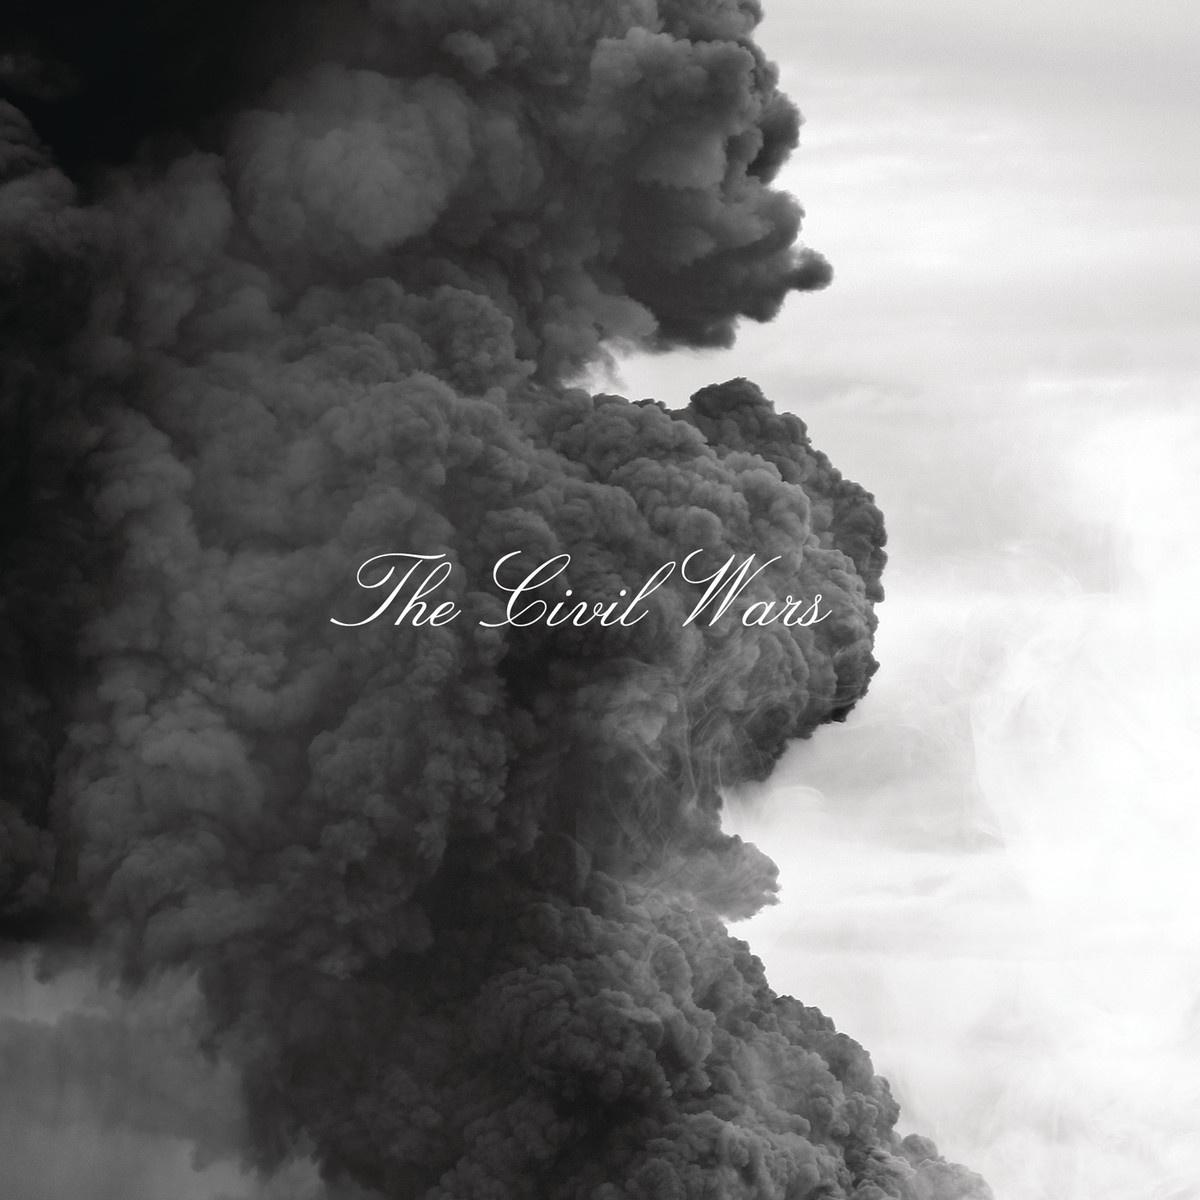 Dust to Dust歌词 歌手The Civil Wars-专辑The Civil Wars-单曲《Dust to Dust》LRC歌词下载